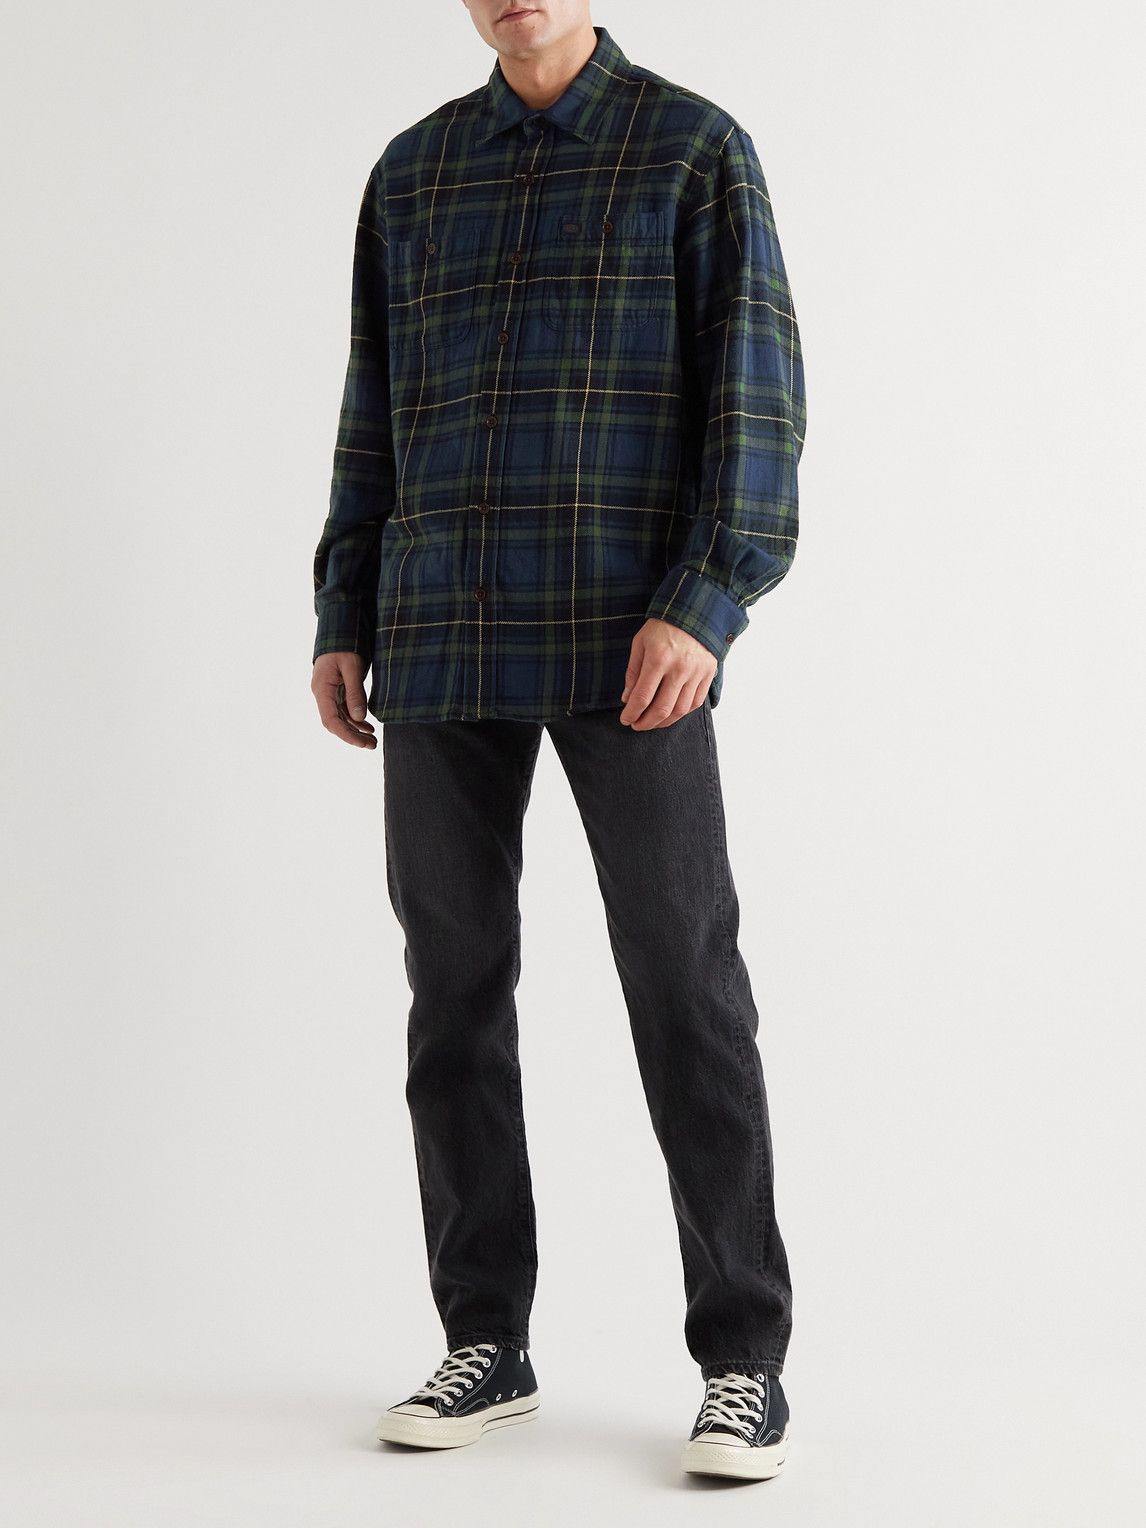 Nudie Jeans - Filip Checked Cotton-Flannel Shirt - Blue Nudie Jeans Co